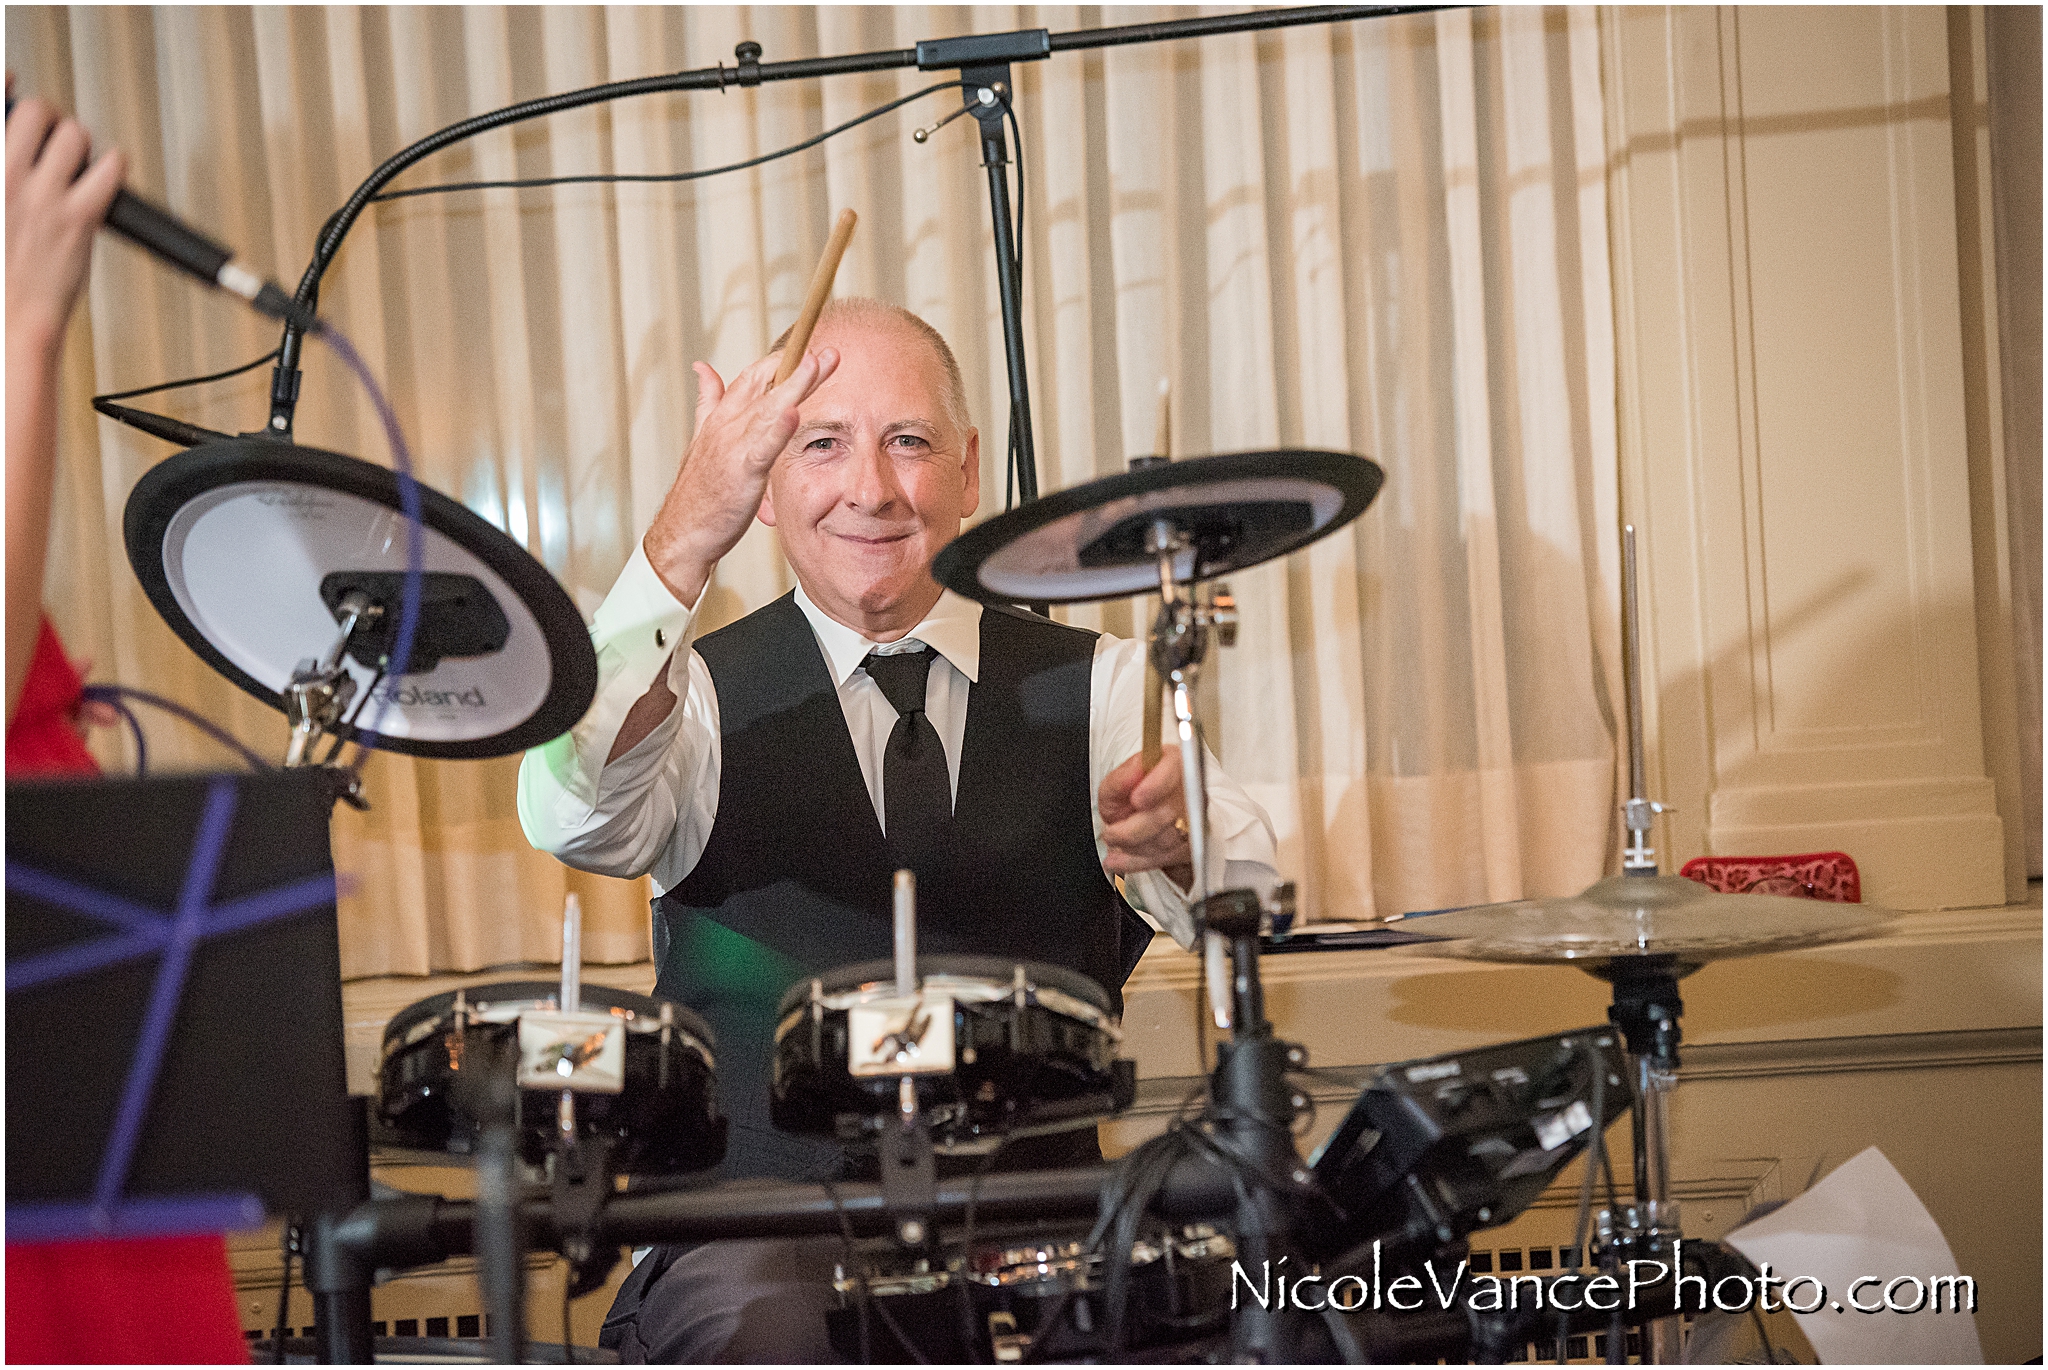 The groom steps in for a drum performance during his wedding reception at the Hotel John Marshall.